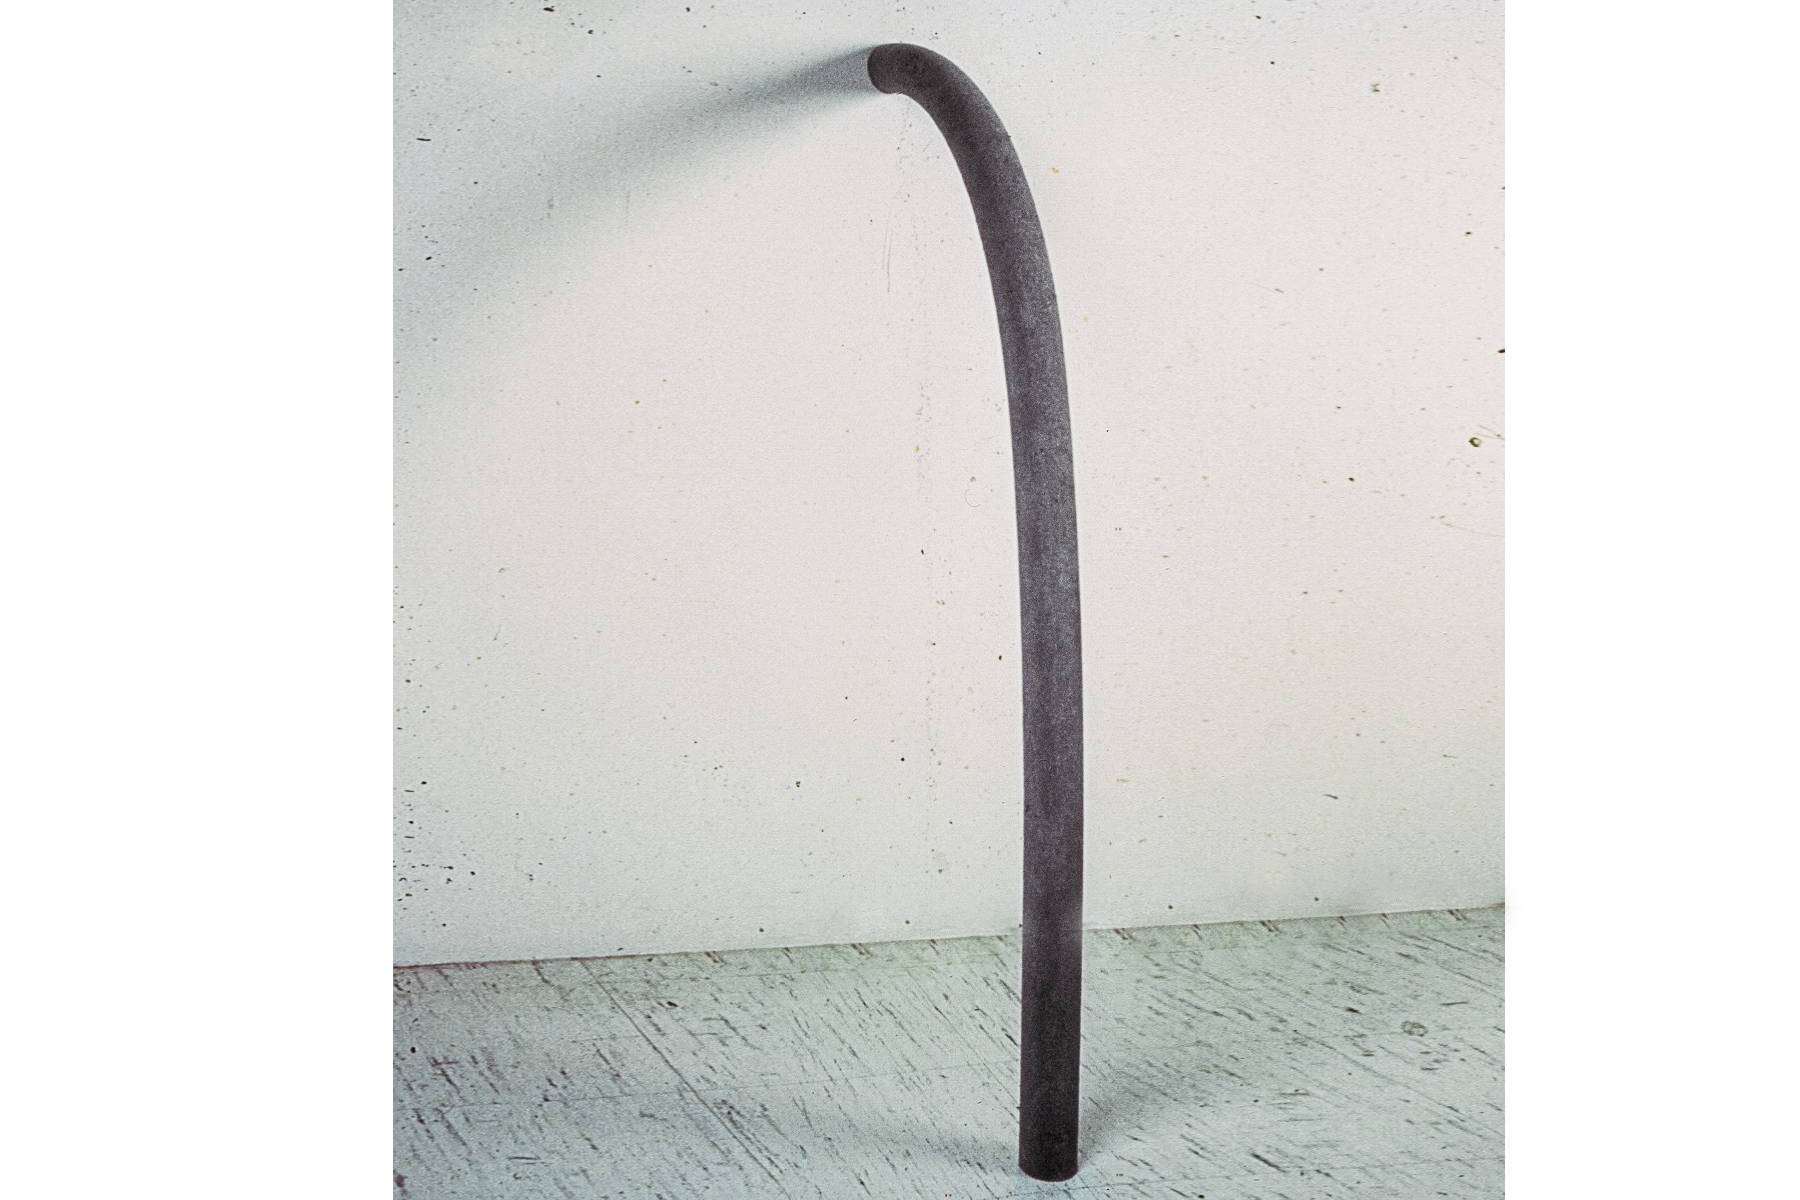 Pipe Without Ruffle, 1979